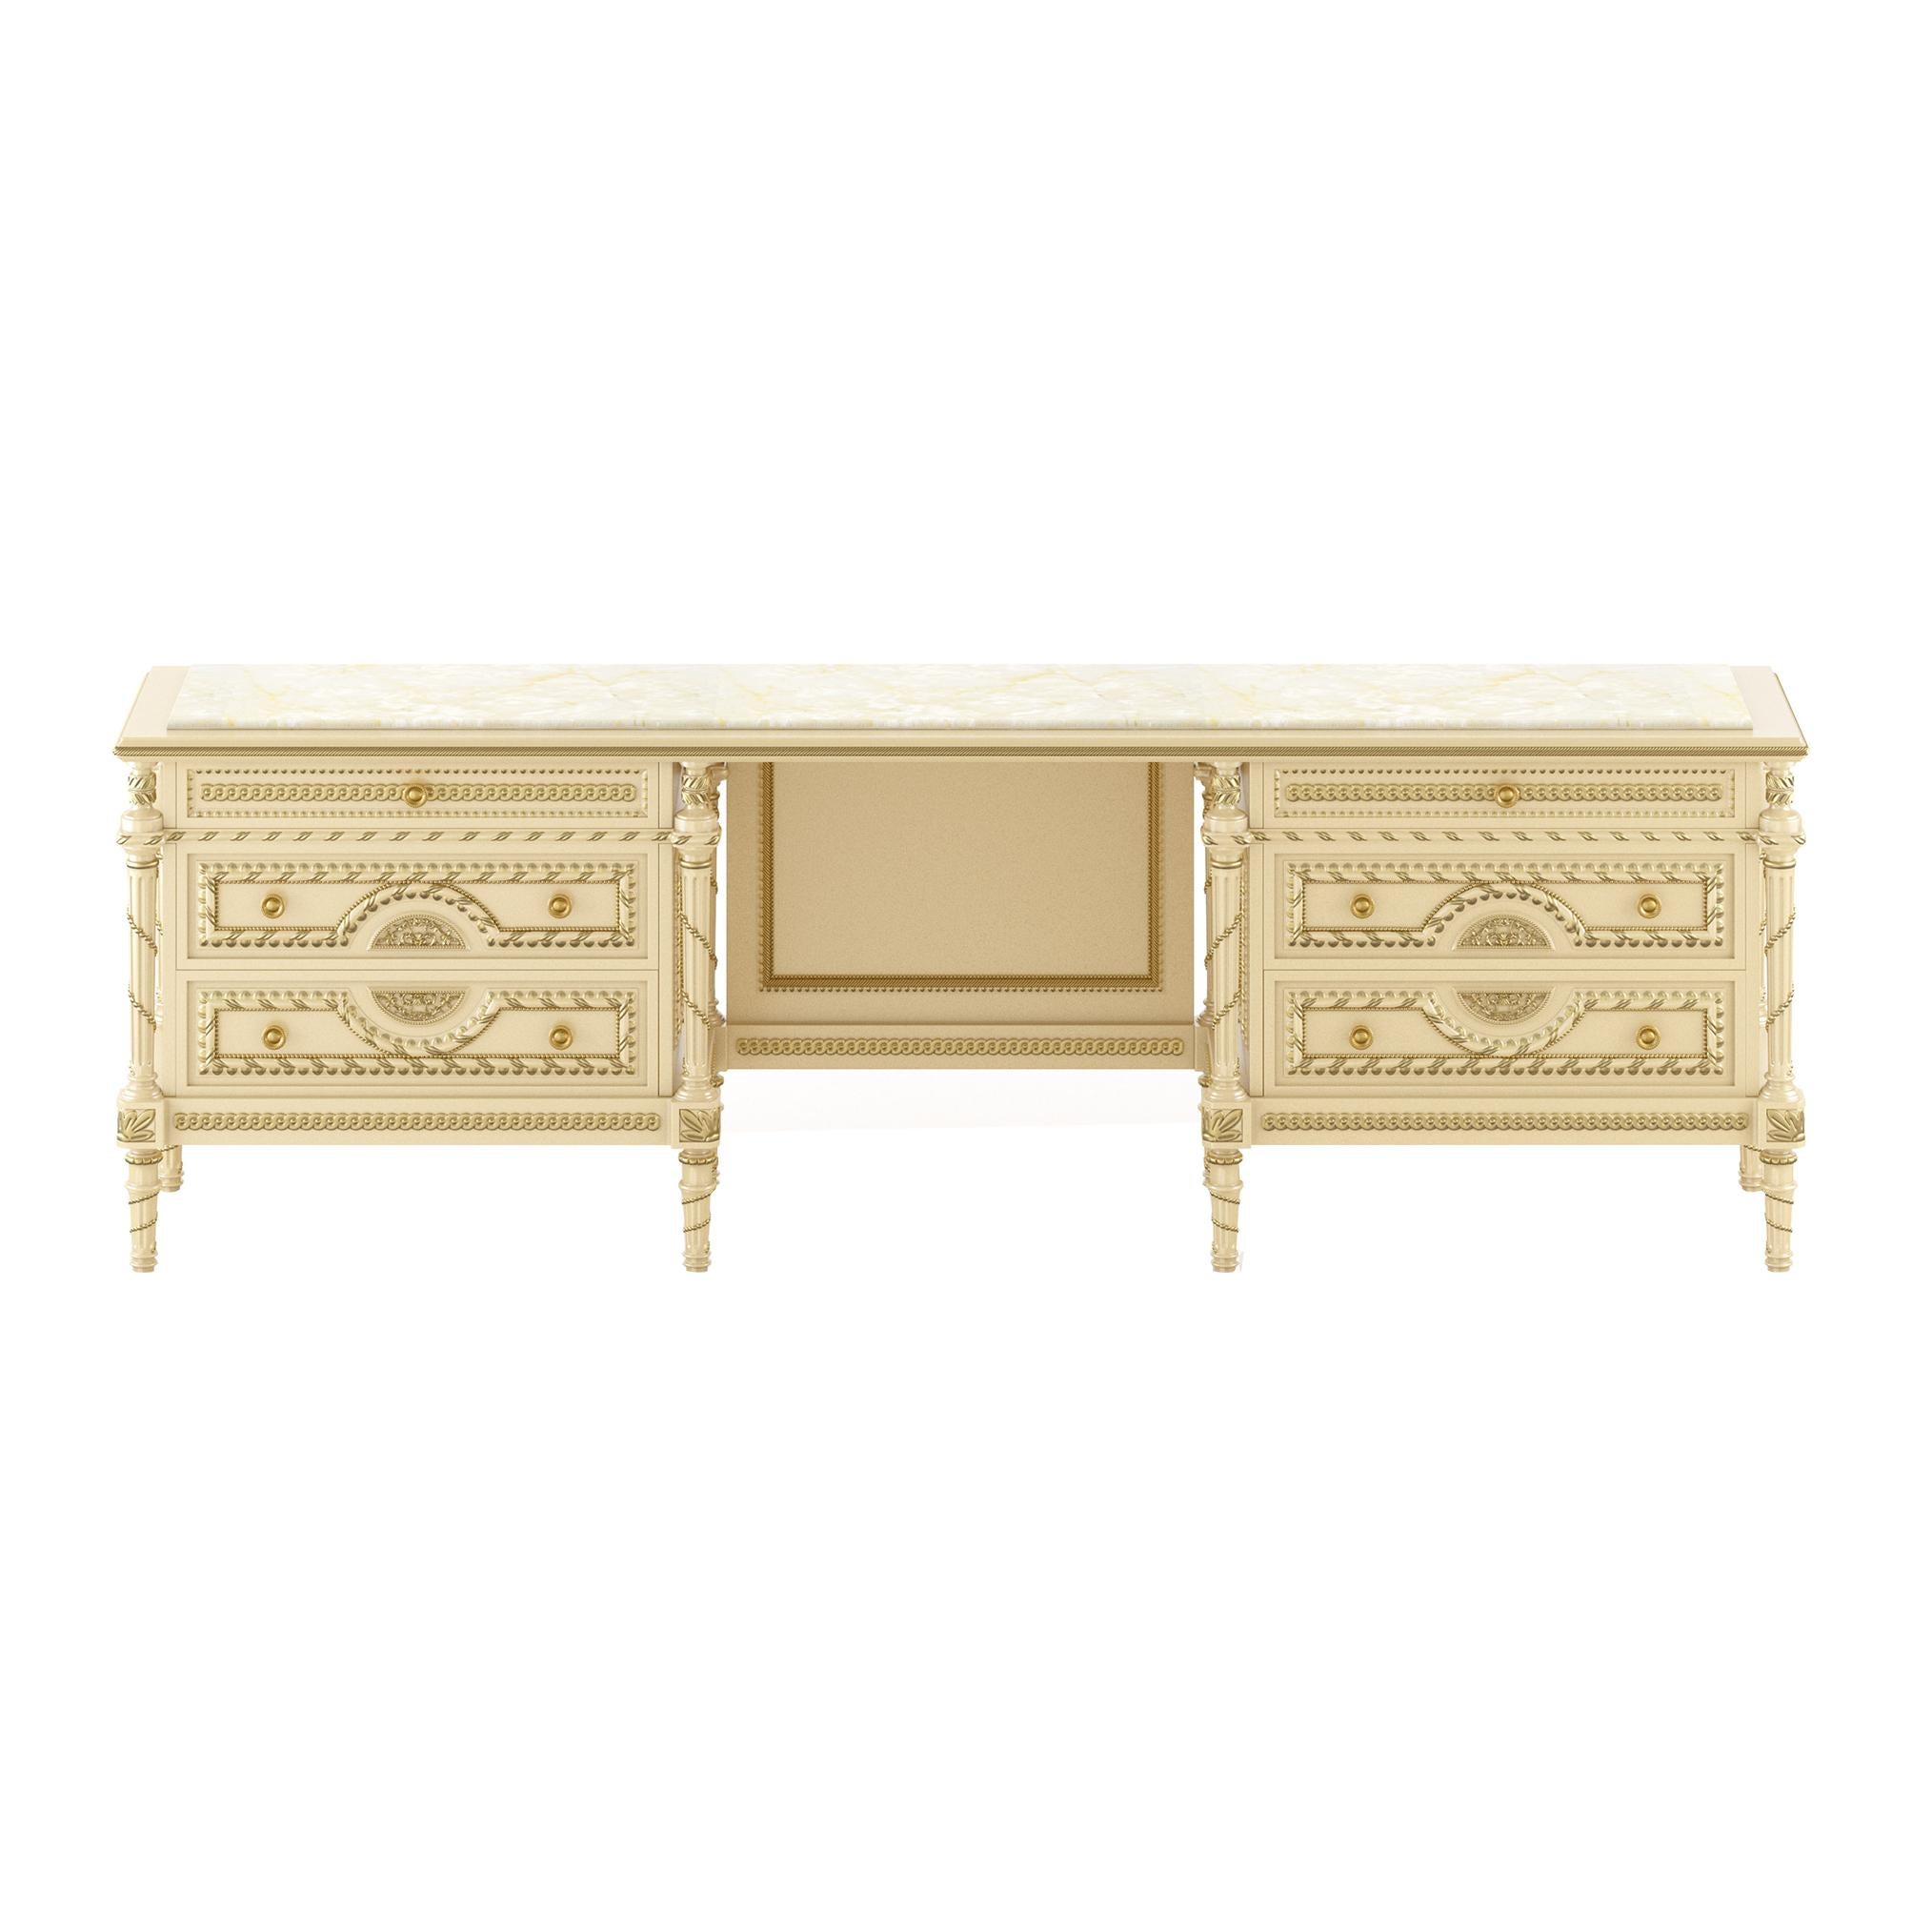 Luxurious empire-style vanity unit from Modenese Luxury Interiors, Italian furniture producer. Made of solid wood with white laquered finish and Honey Onyx top, plus empire-style wood carved columns, gold leaf details and golden knobs. The Italian